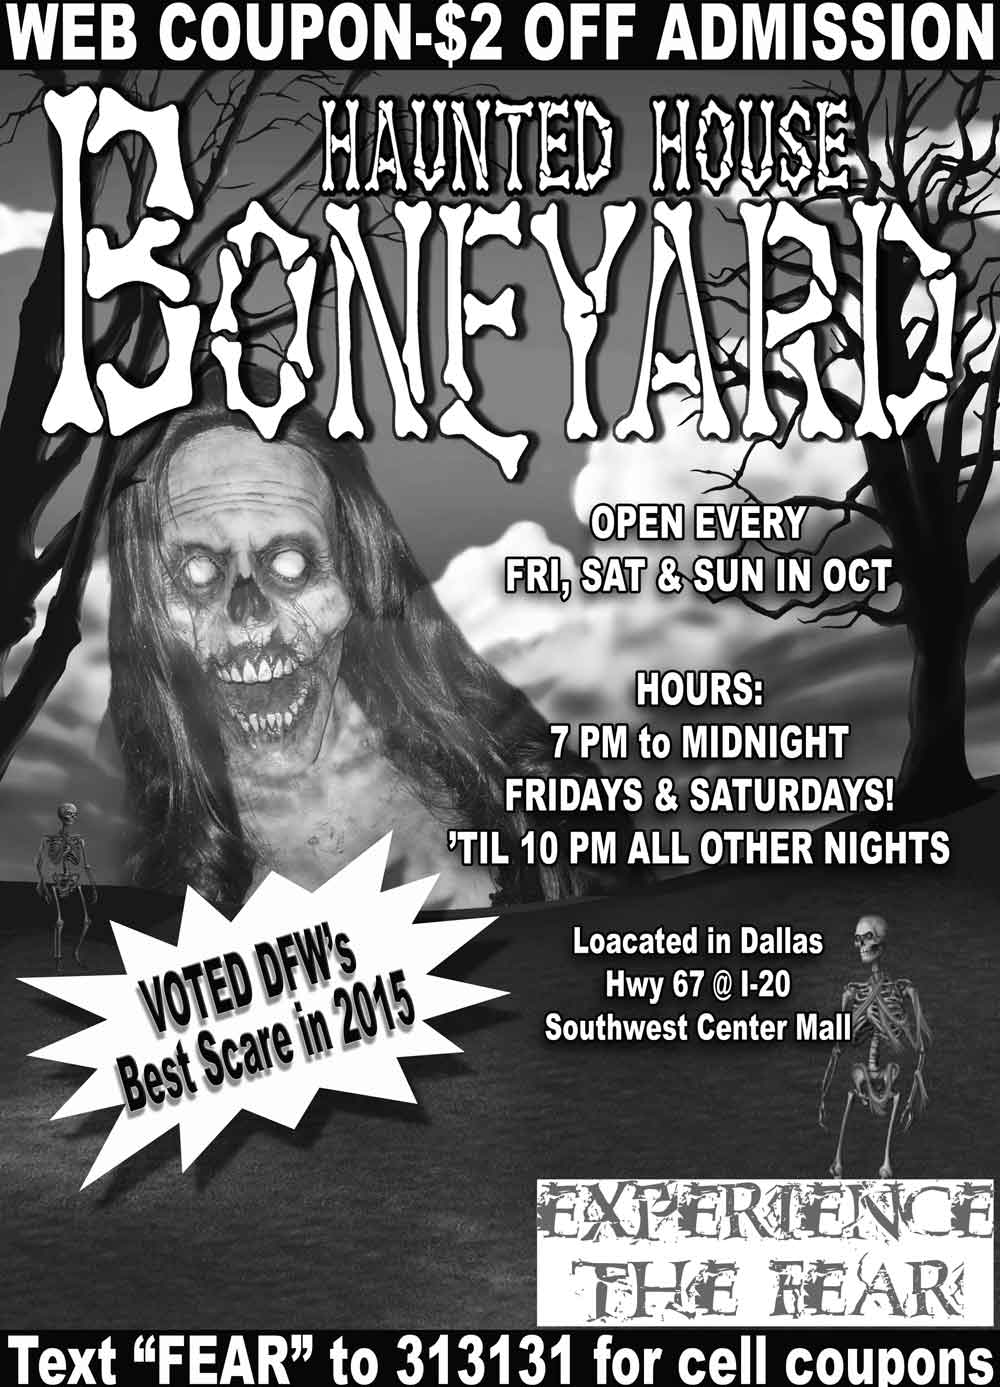 Boneyard Haunted House - 201 Discount Coupons. text FEAR to 313131 for additional savings sent directly to your cell phone.